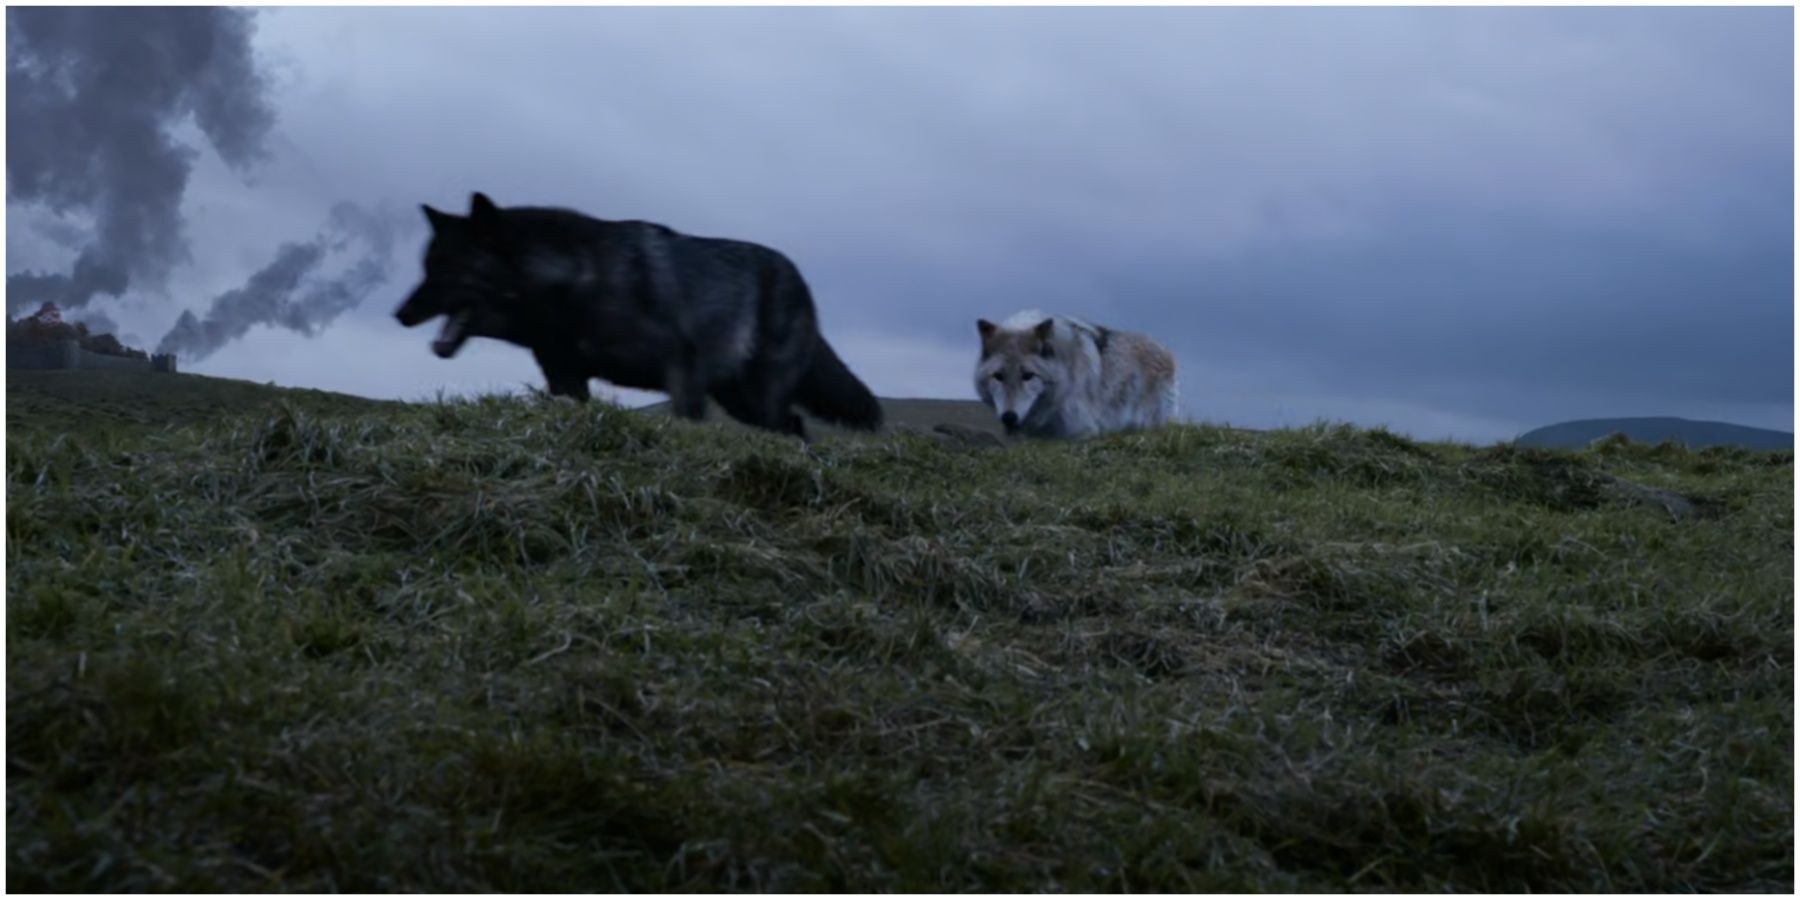 Shaggydog and Summer outside Winterfell in Game of Thrones.